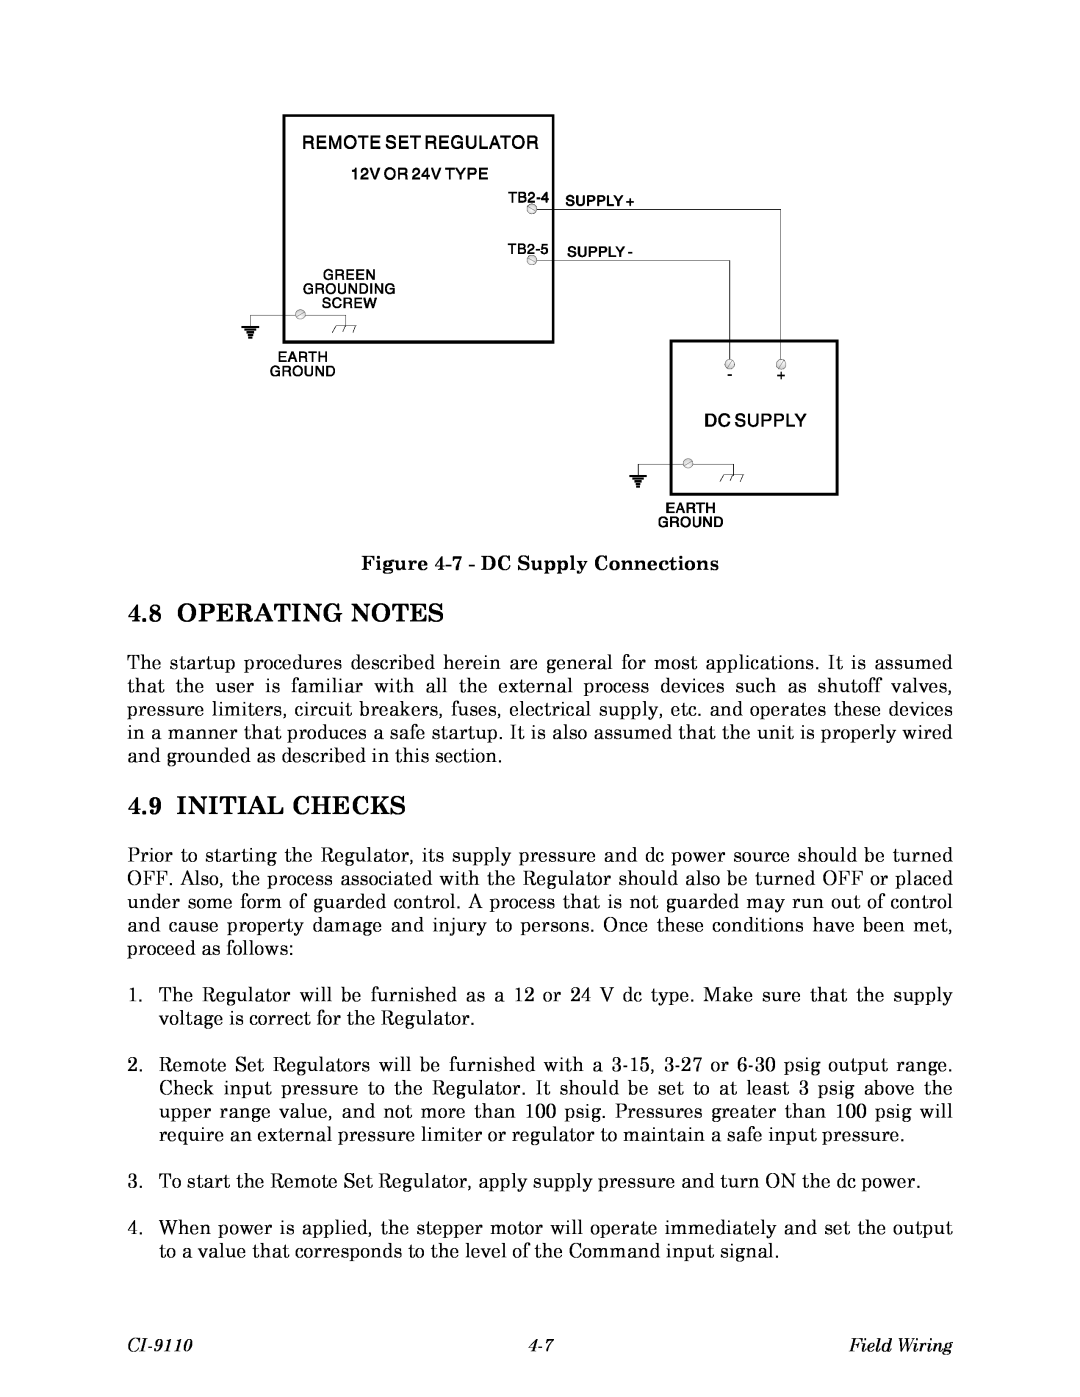 Emerson Process Management Series 9110, CI-9110, 9110-00A Operating Notes, Initial Checks, 7 - DC Supply Connections 